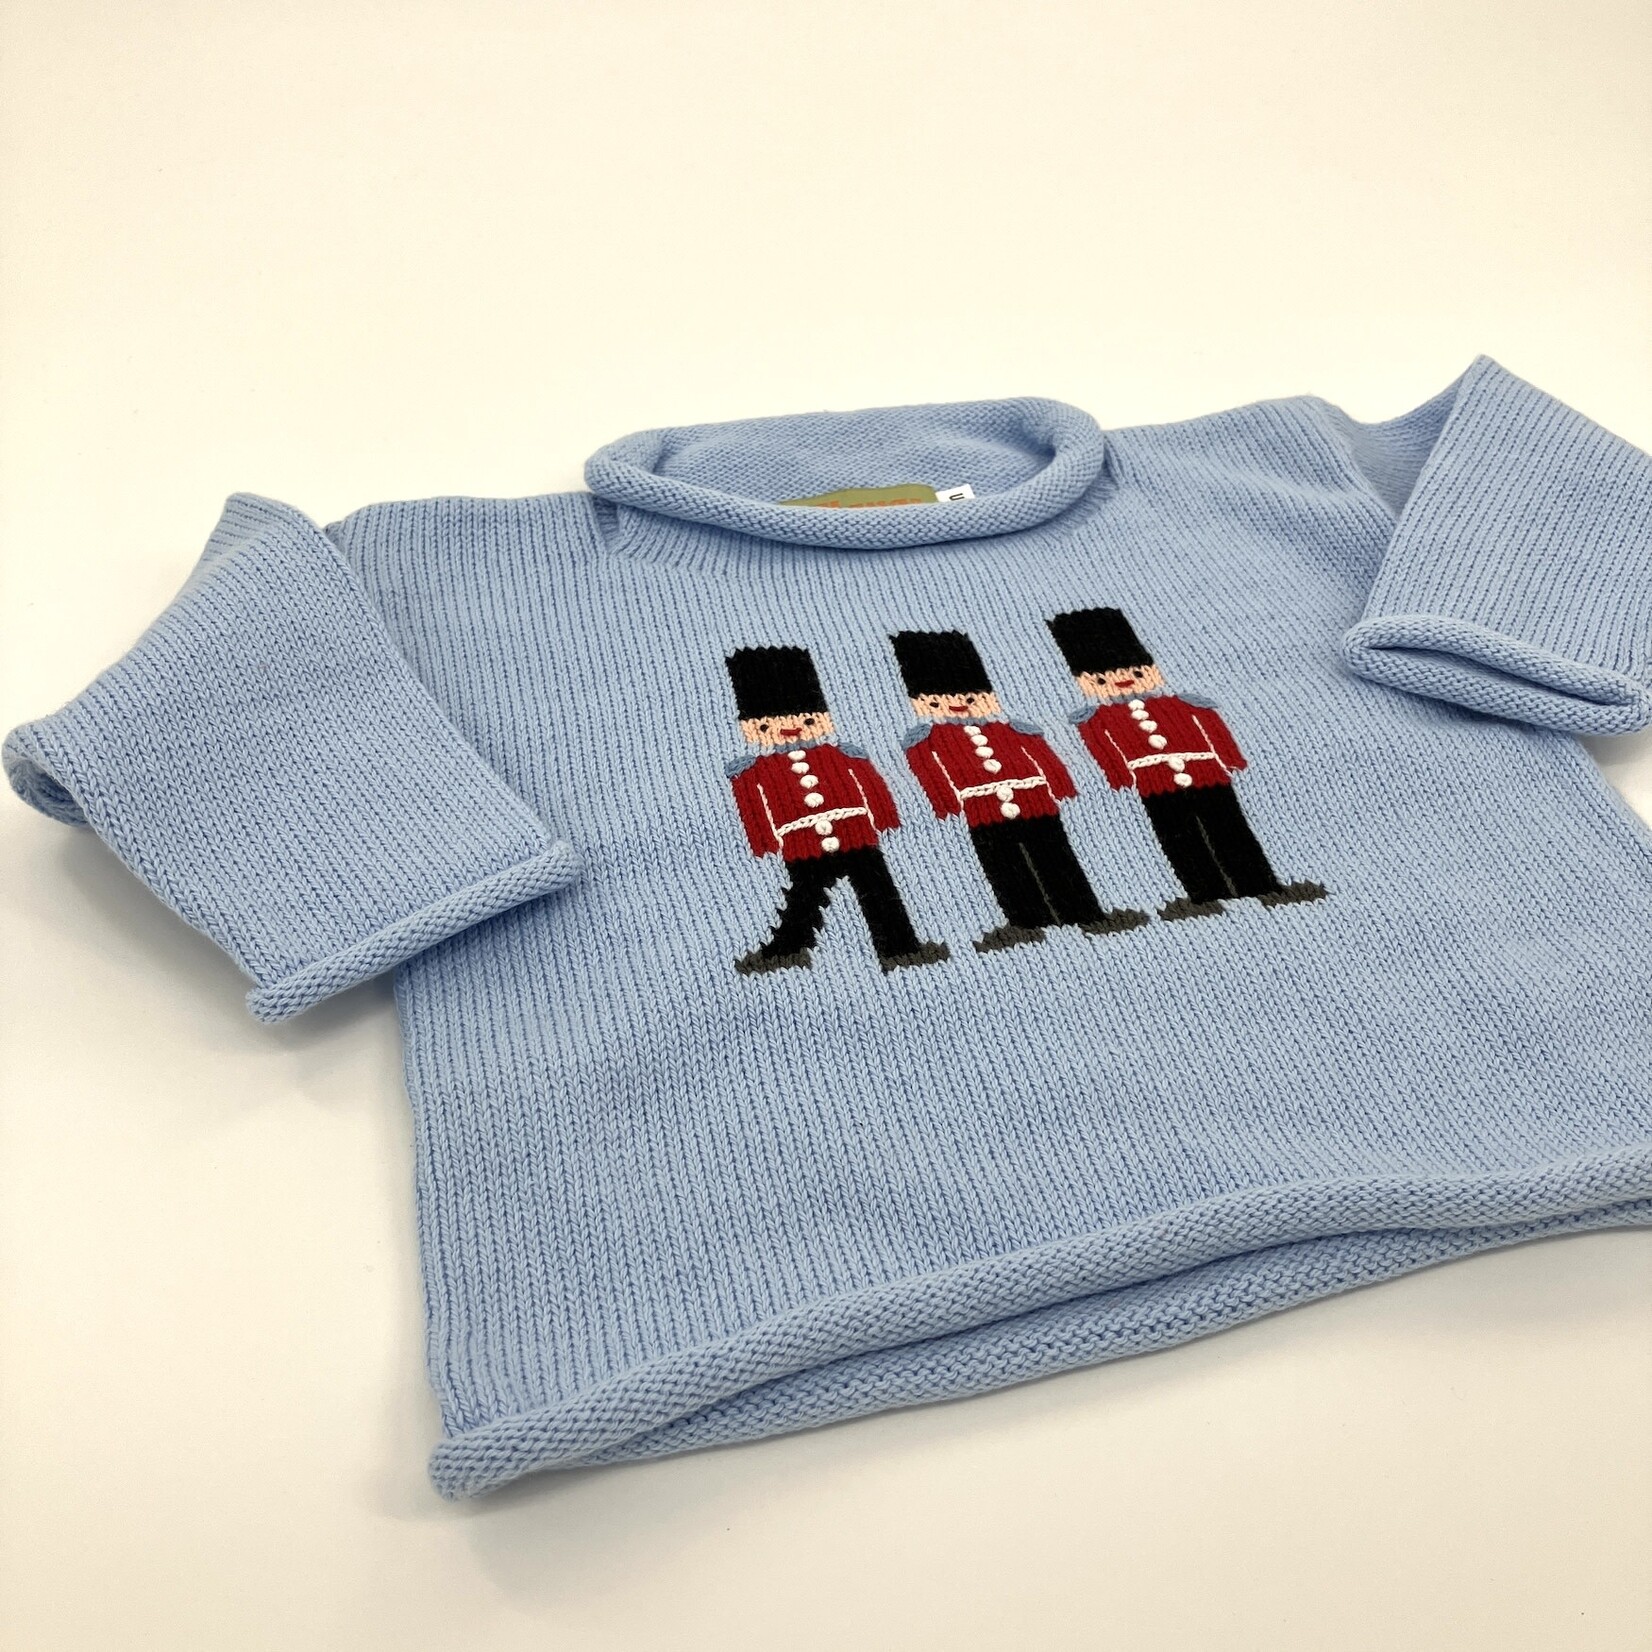 ACVISA/CLAVER Toy Soldiers Sweater